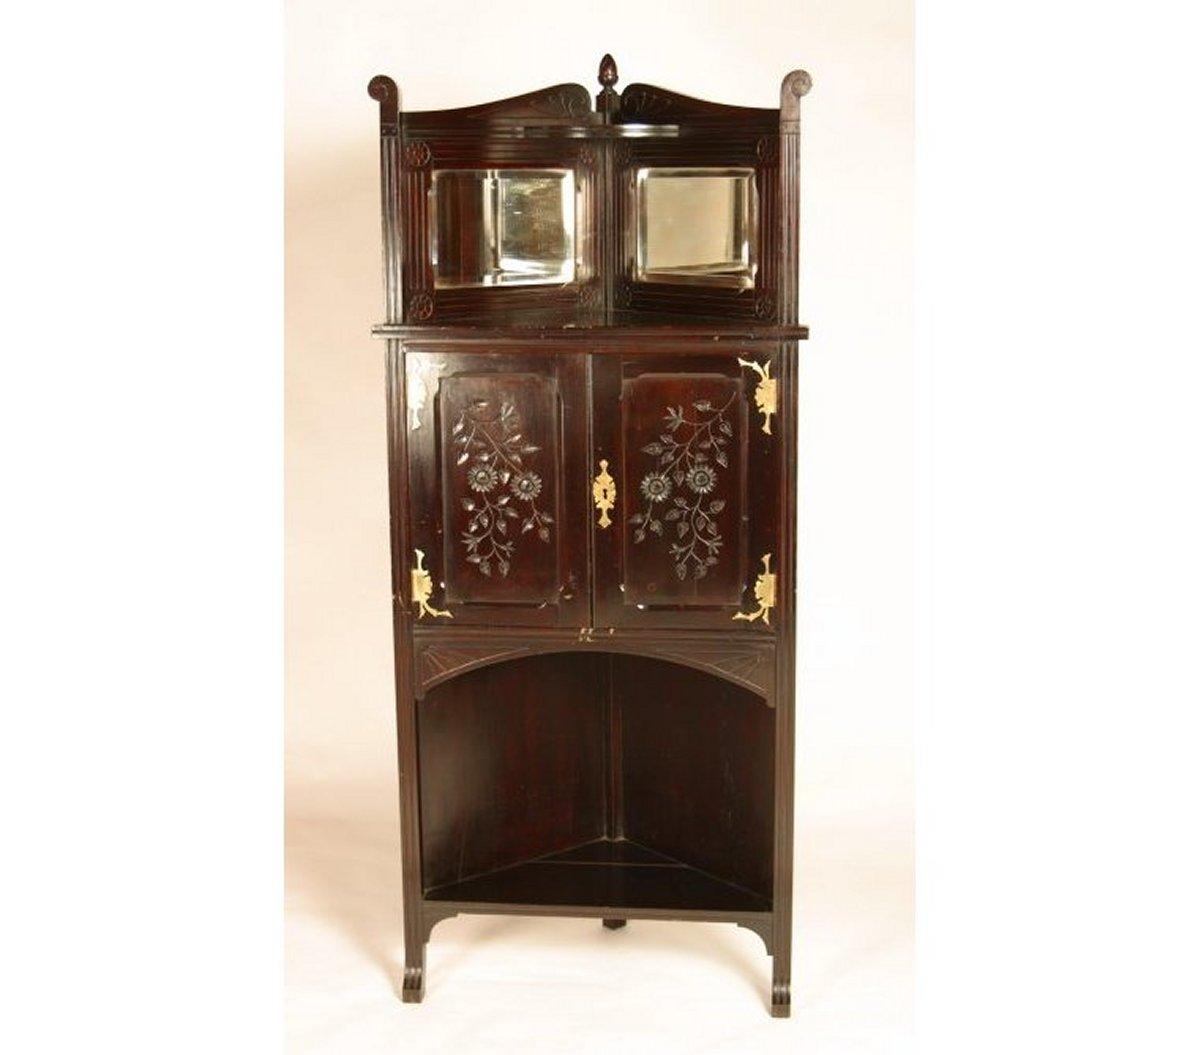 An Aesthetic Movement Mahogany Corner Cabinet with floral decoration to the upper shelf area, and to the doors incised decoration of circular flower heads and leaves radiating down with applied stylised hinges and escutcheon, a large lower display